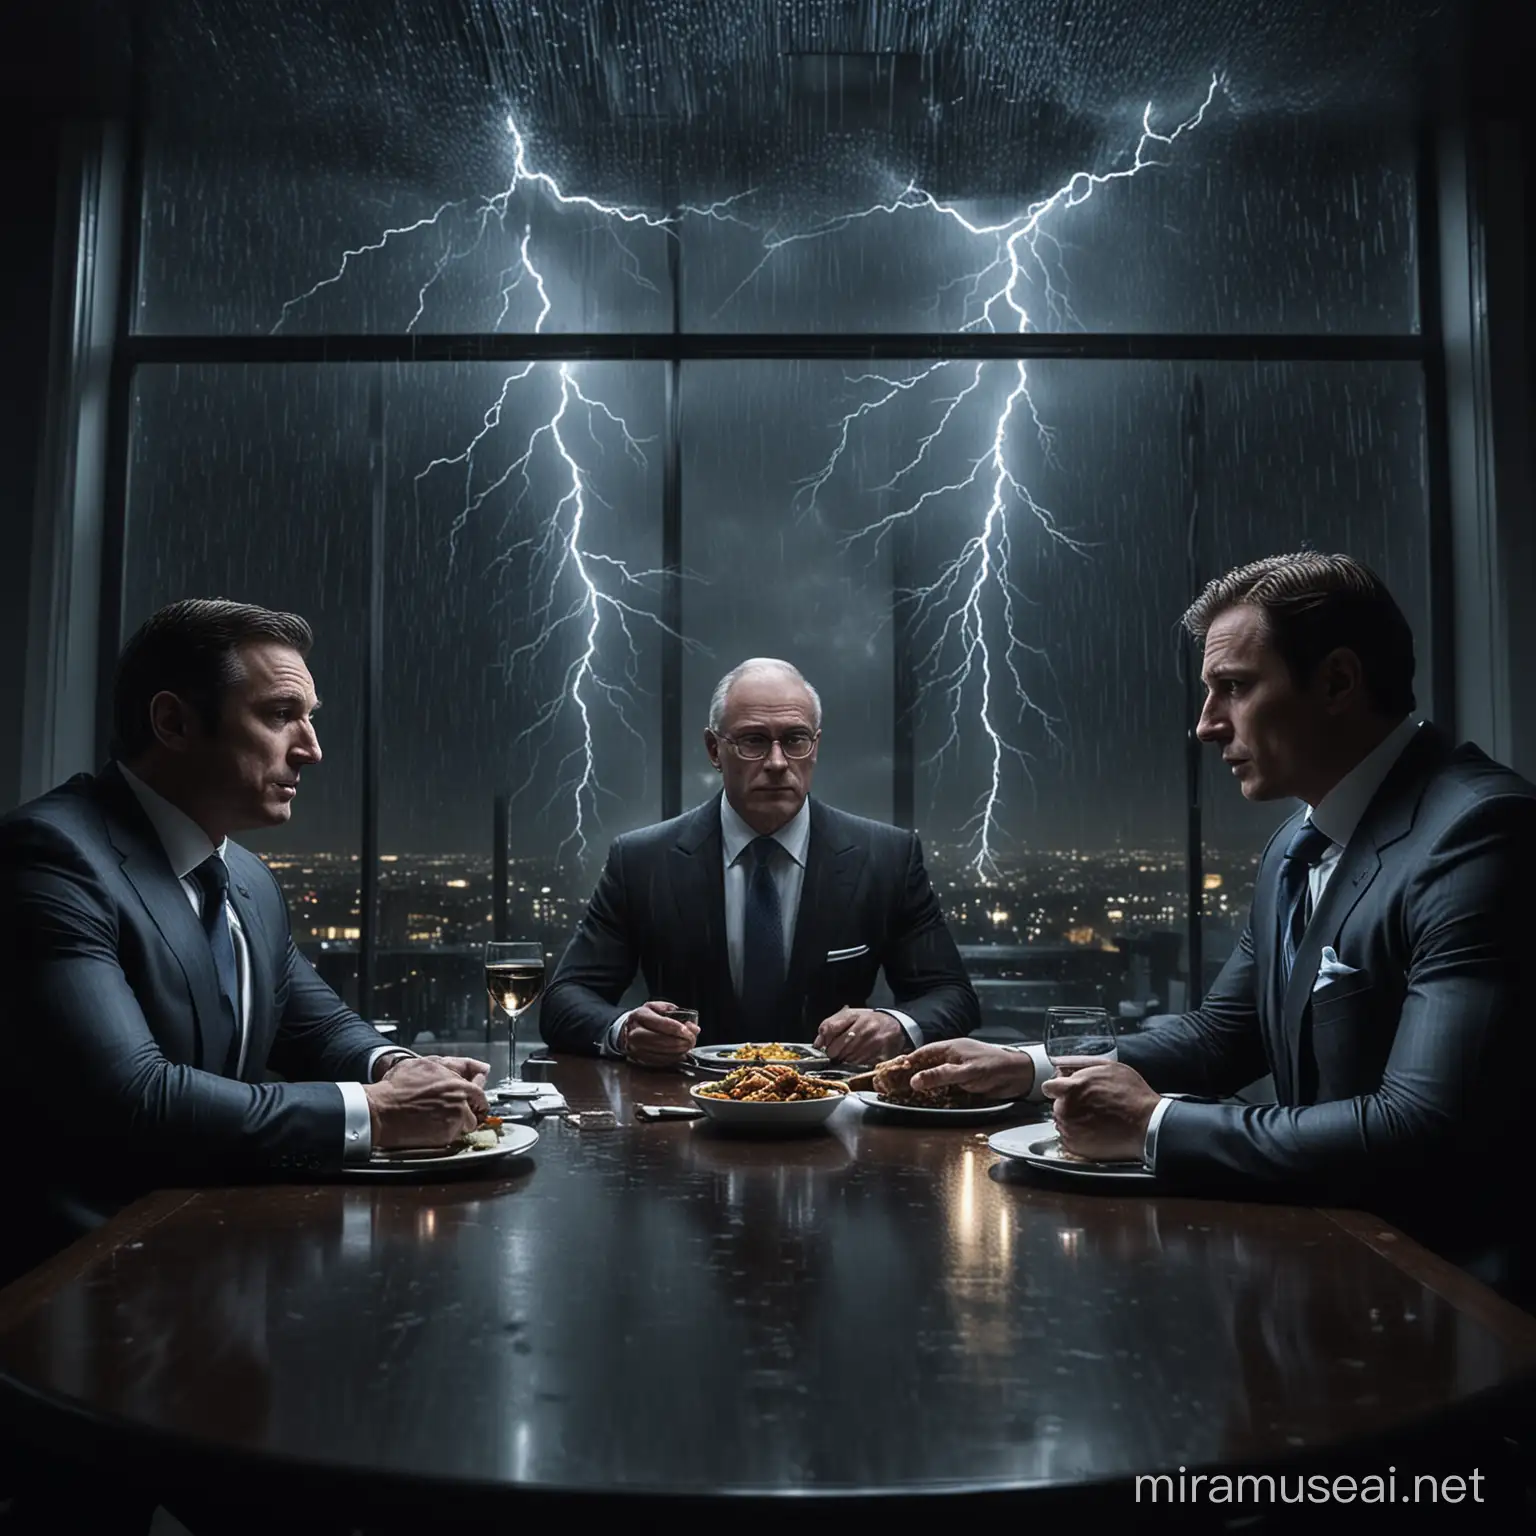 3 bulked billionaires sharing a dinner table, discussing business in a cold dark room at night during a thunderstorm occuring outside the window 